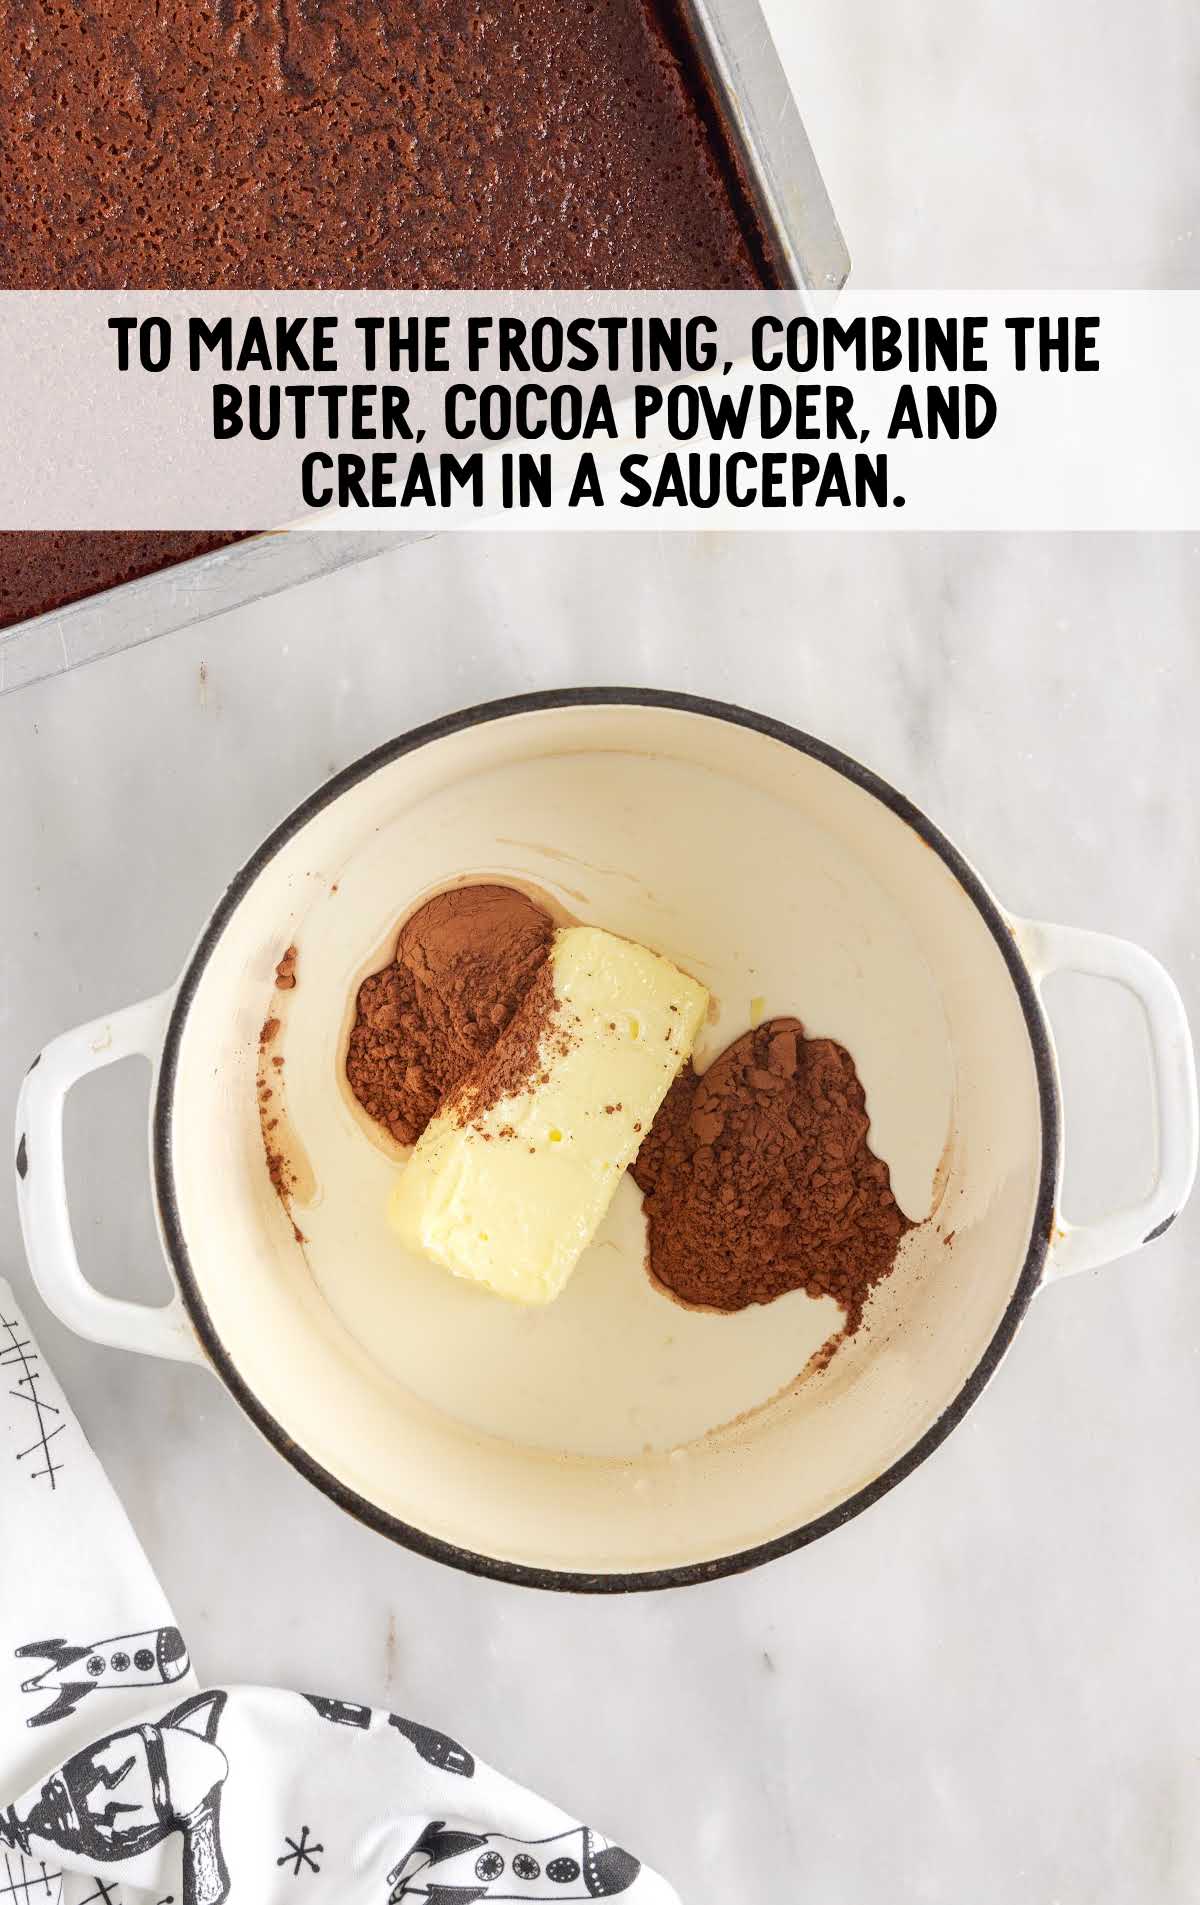 butter, cocoa powder, and cream combined in a saucepan